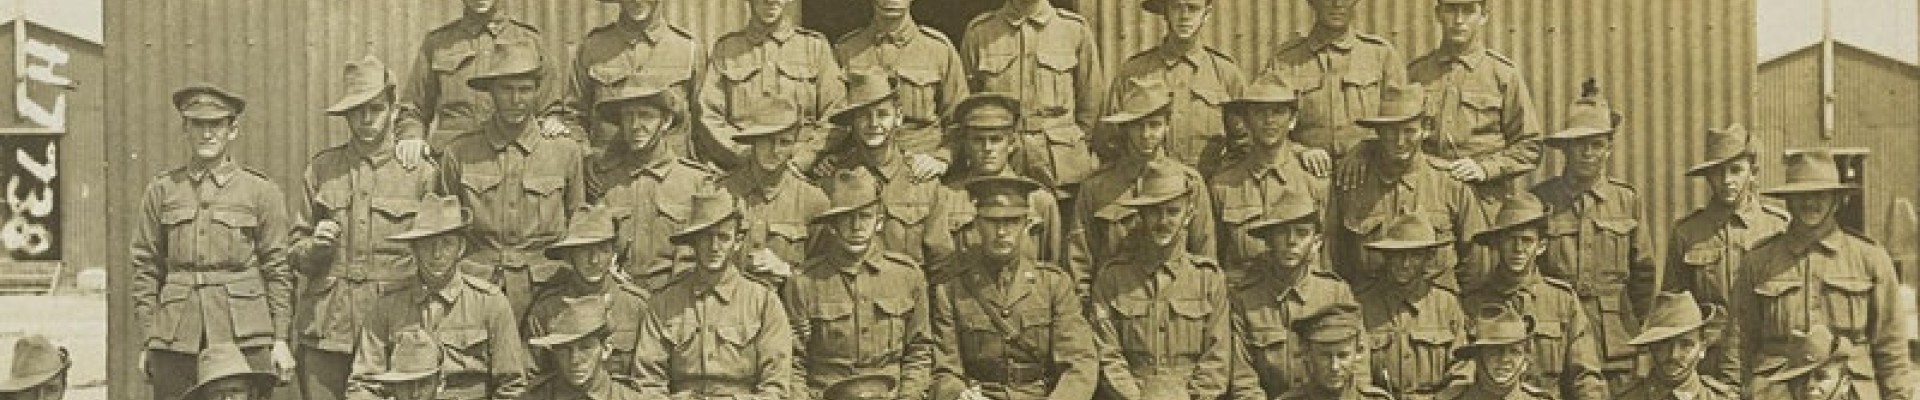 Group Portrait of Members of 42nd Infantry Battalion B Company England 1916